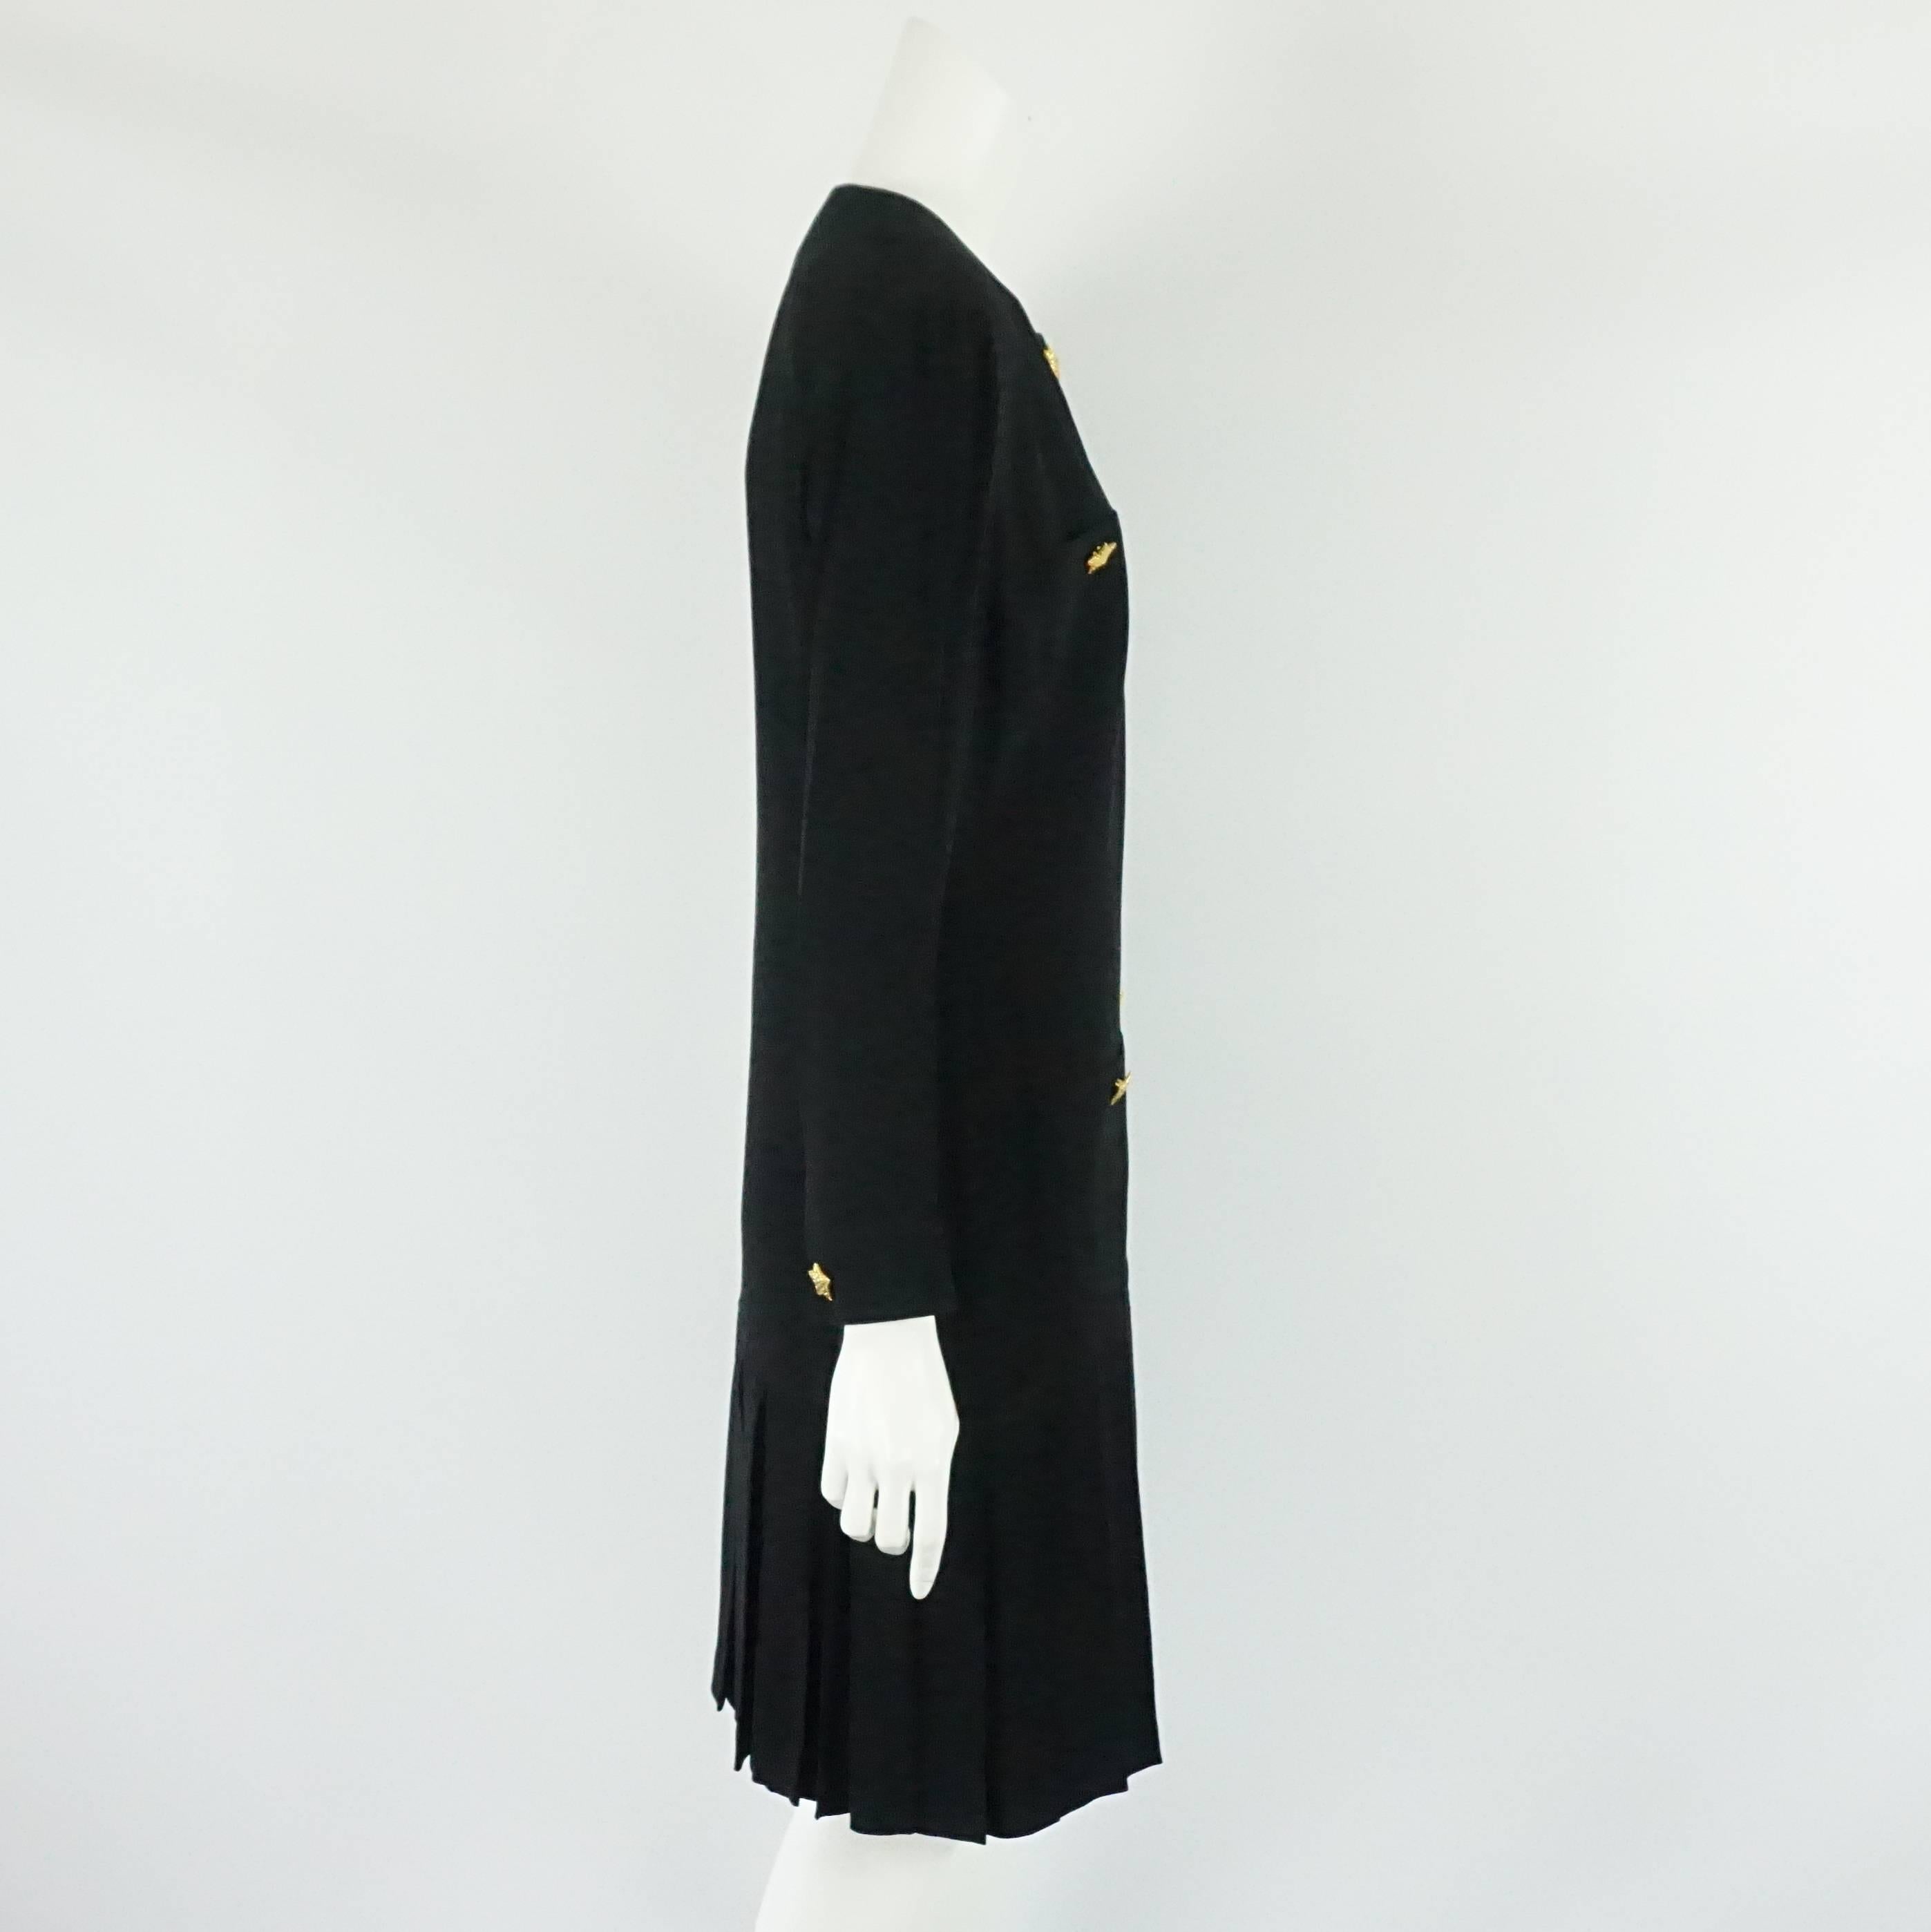 Escada by Margaretha Ley Black Shift Dress with bottom pleating-40 Circa 80's This classic piece has long sleeves with wrist band and gold buttons, the bottom of the skirt is pleated, the front has 8 gold star buttons giving it a bit of a coat dress